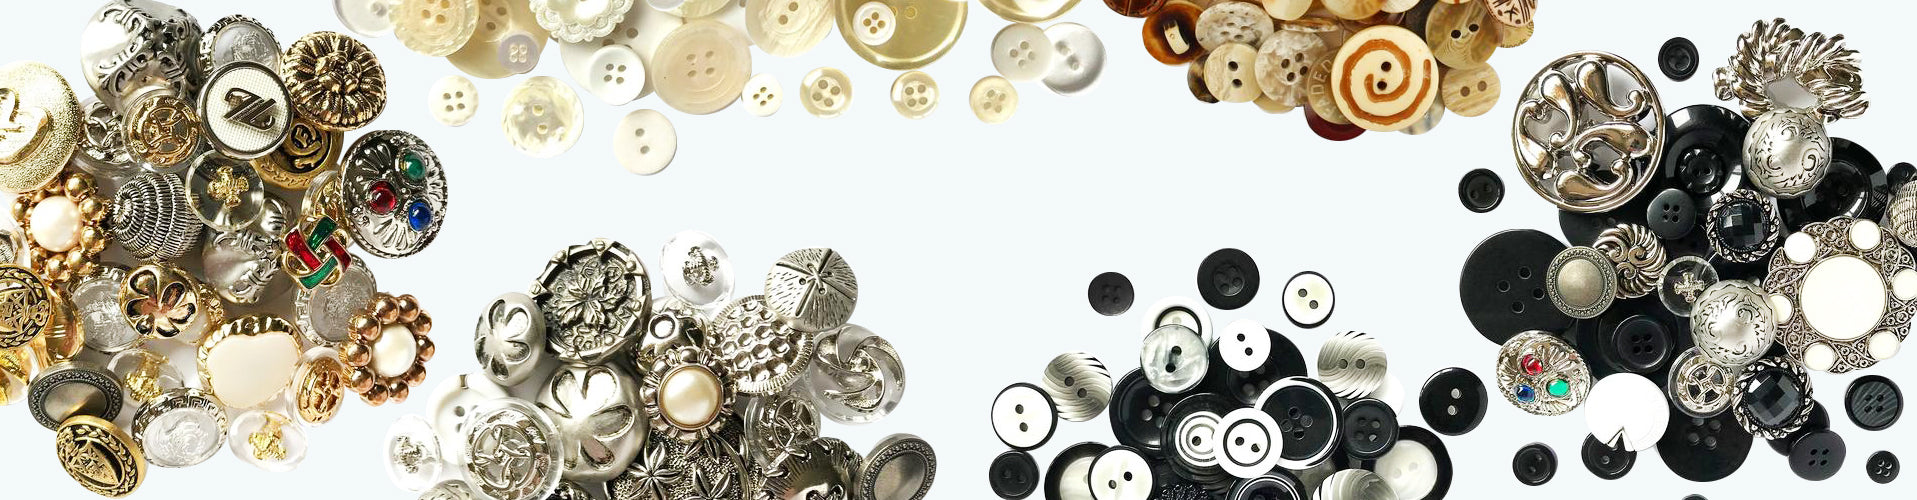 Haberdashery Sewing Buttons | Buttons Galore and More